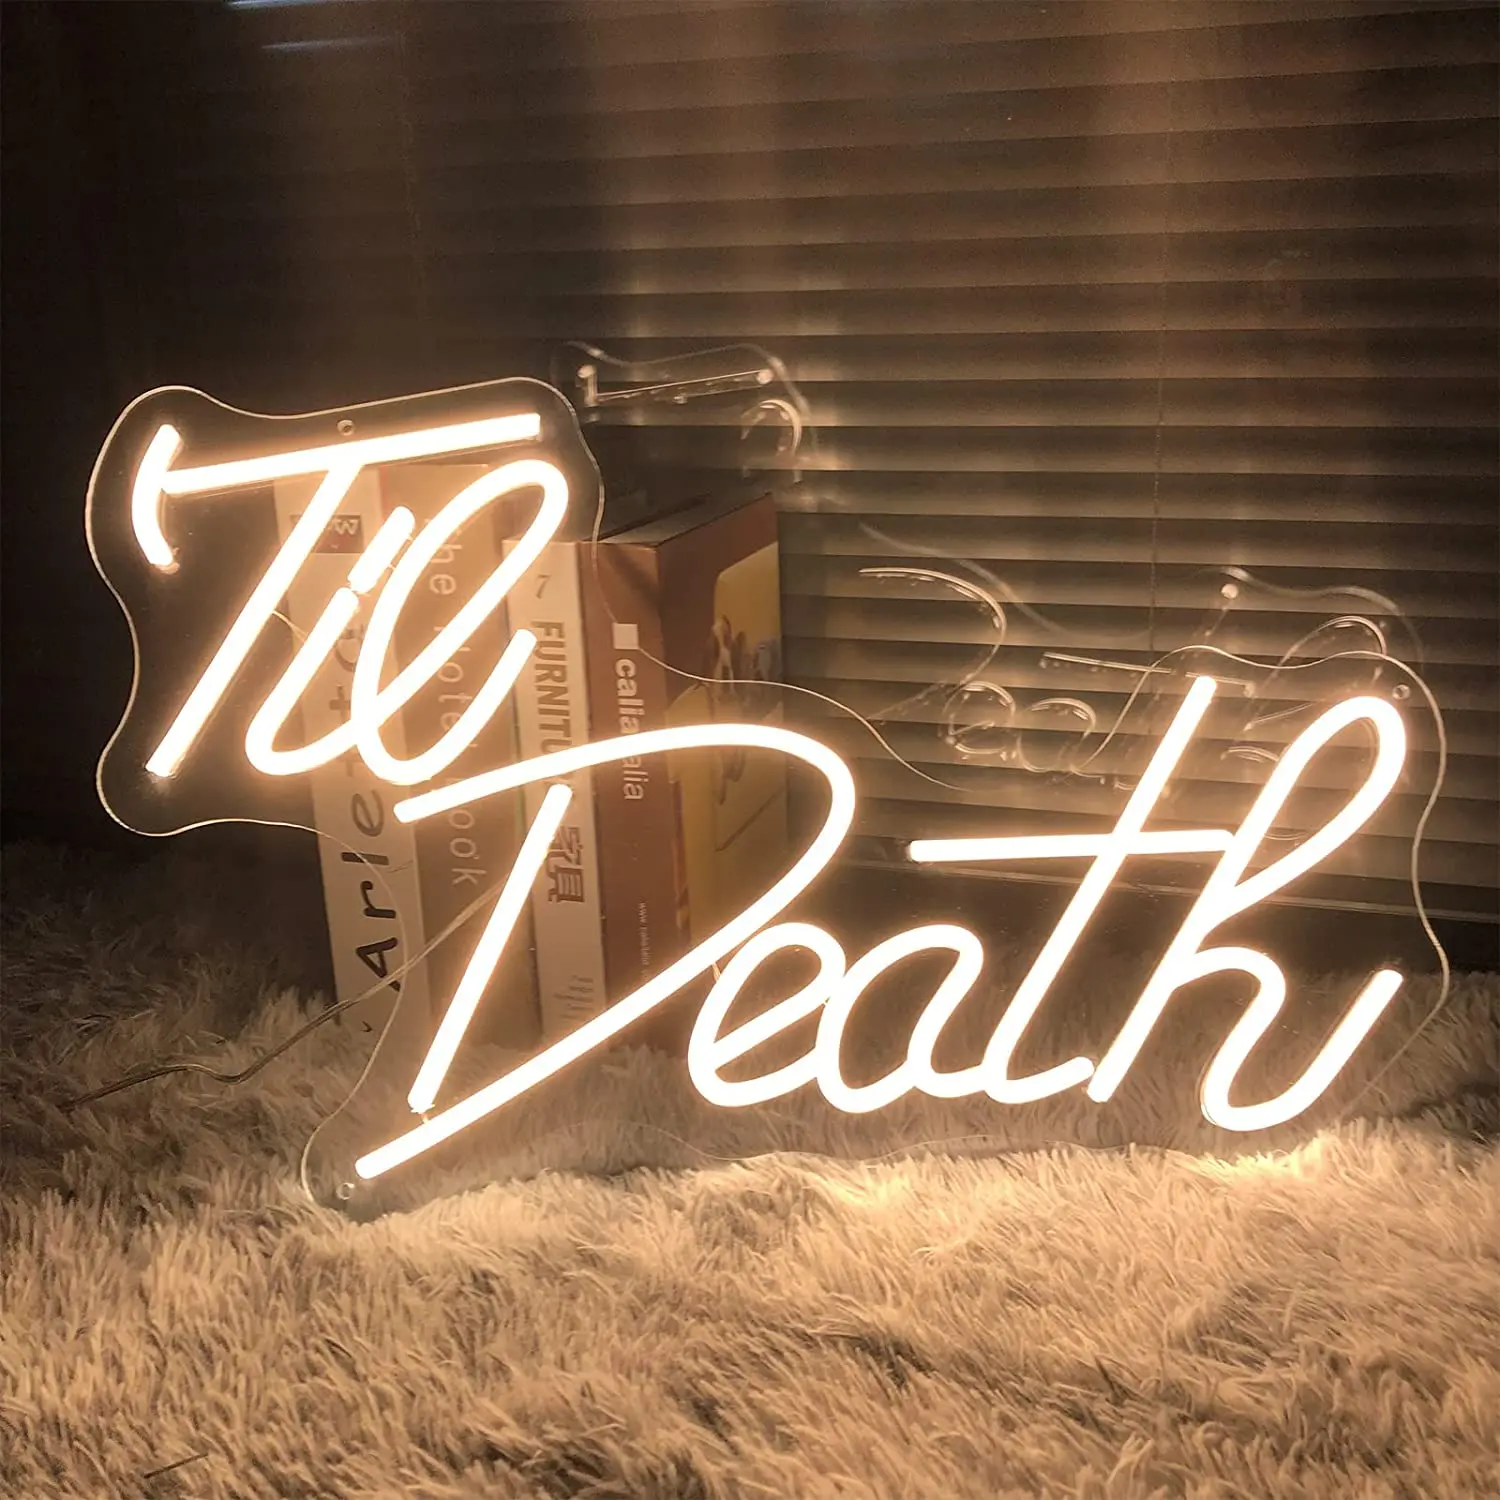 Til Death Neon Signs Led Light For Art Wall Decor Warm White Nice Looking Transparent Acrylic Neon Light Wedding Decoration Lamp